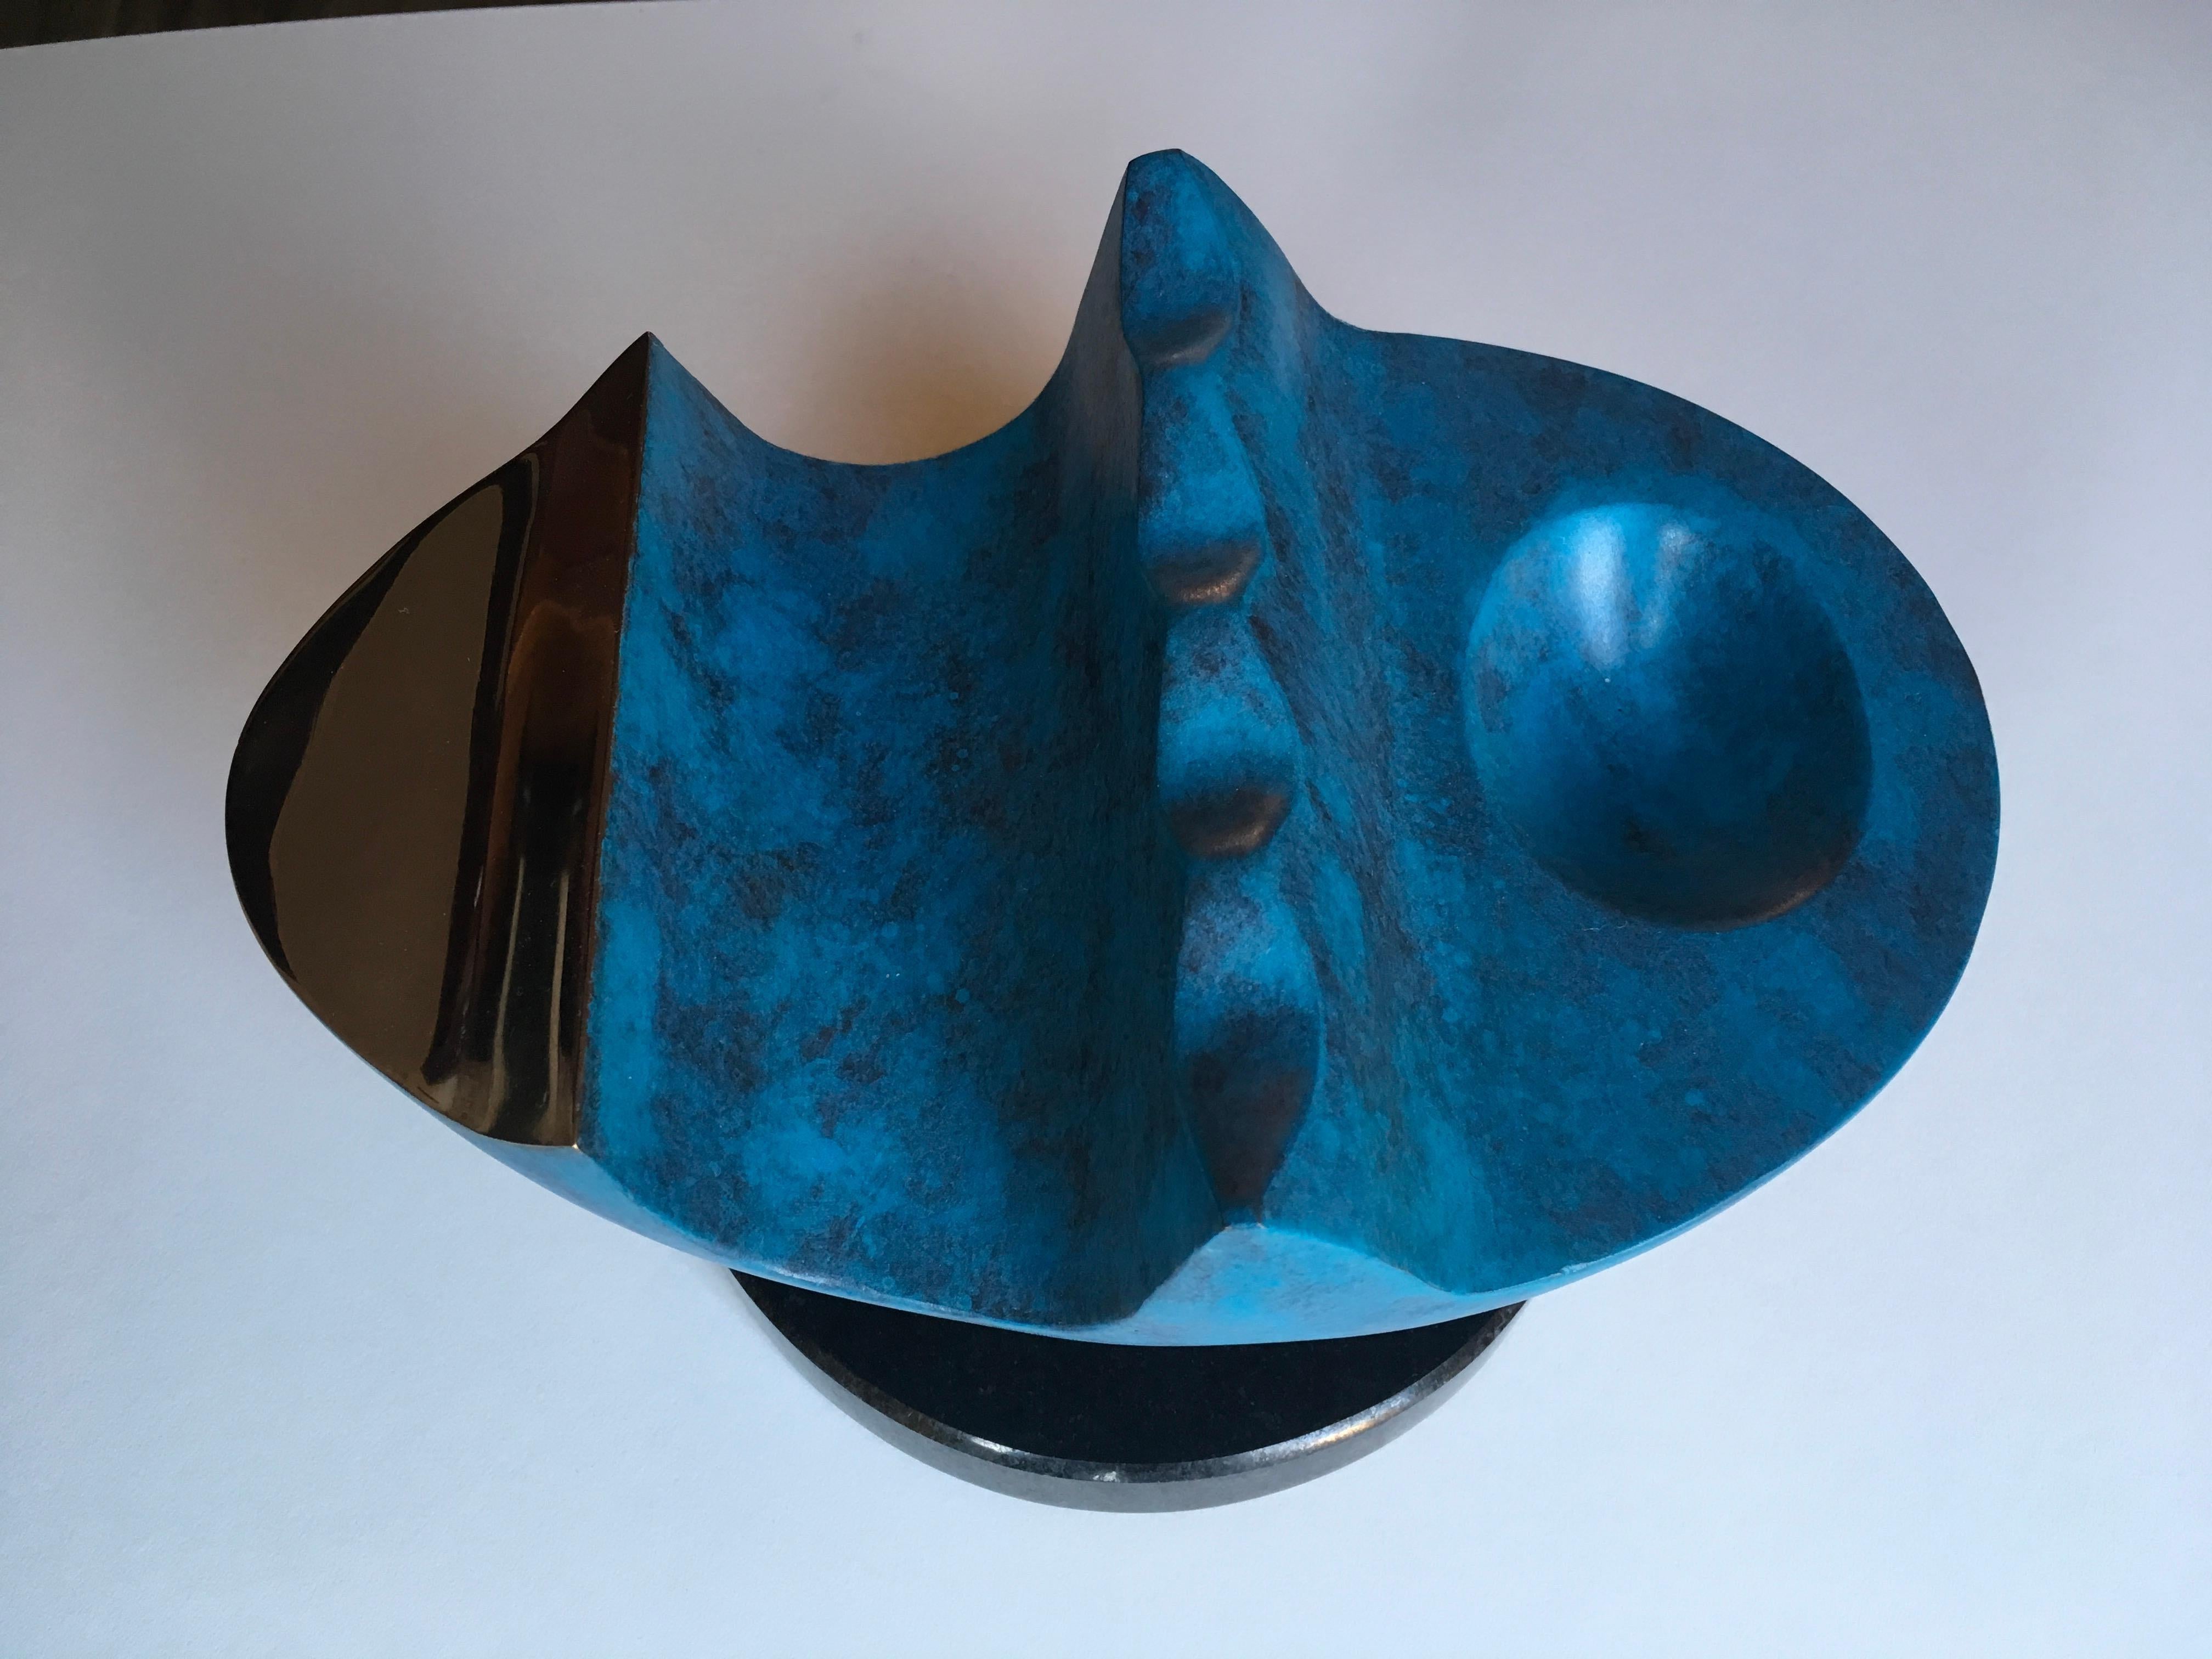 Tidal Stone  - Tabletop limited edition sculpture Bronze  - Modern Sculpture by David Sprakes